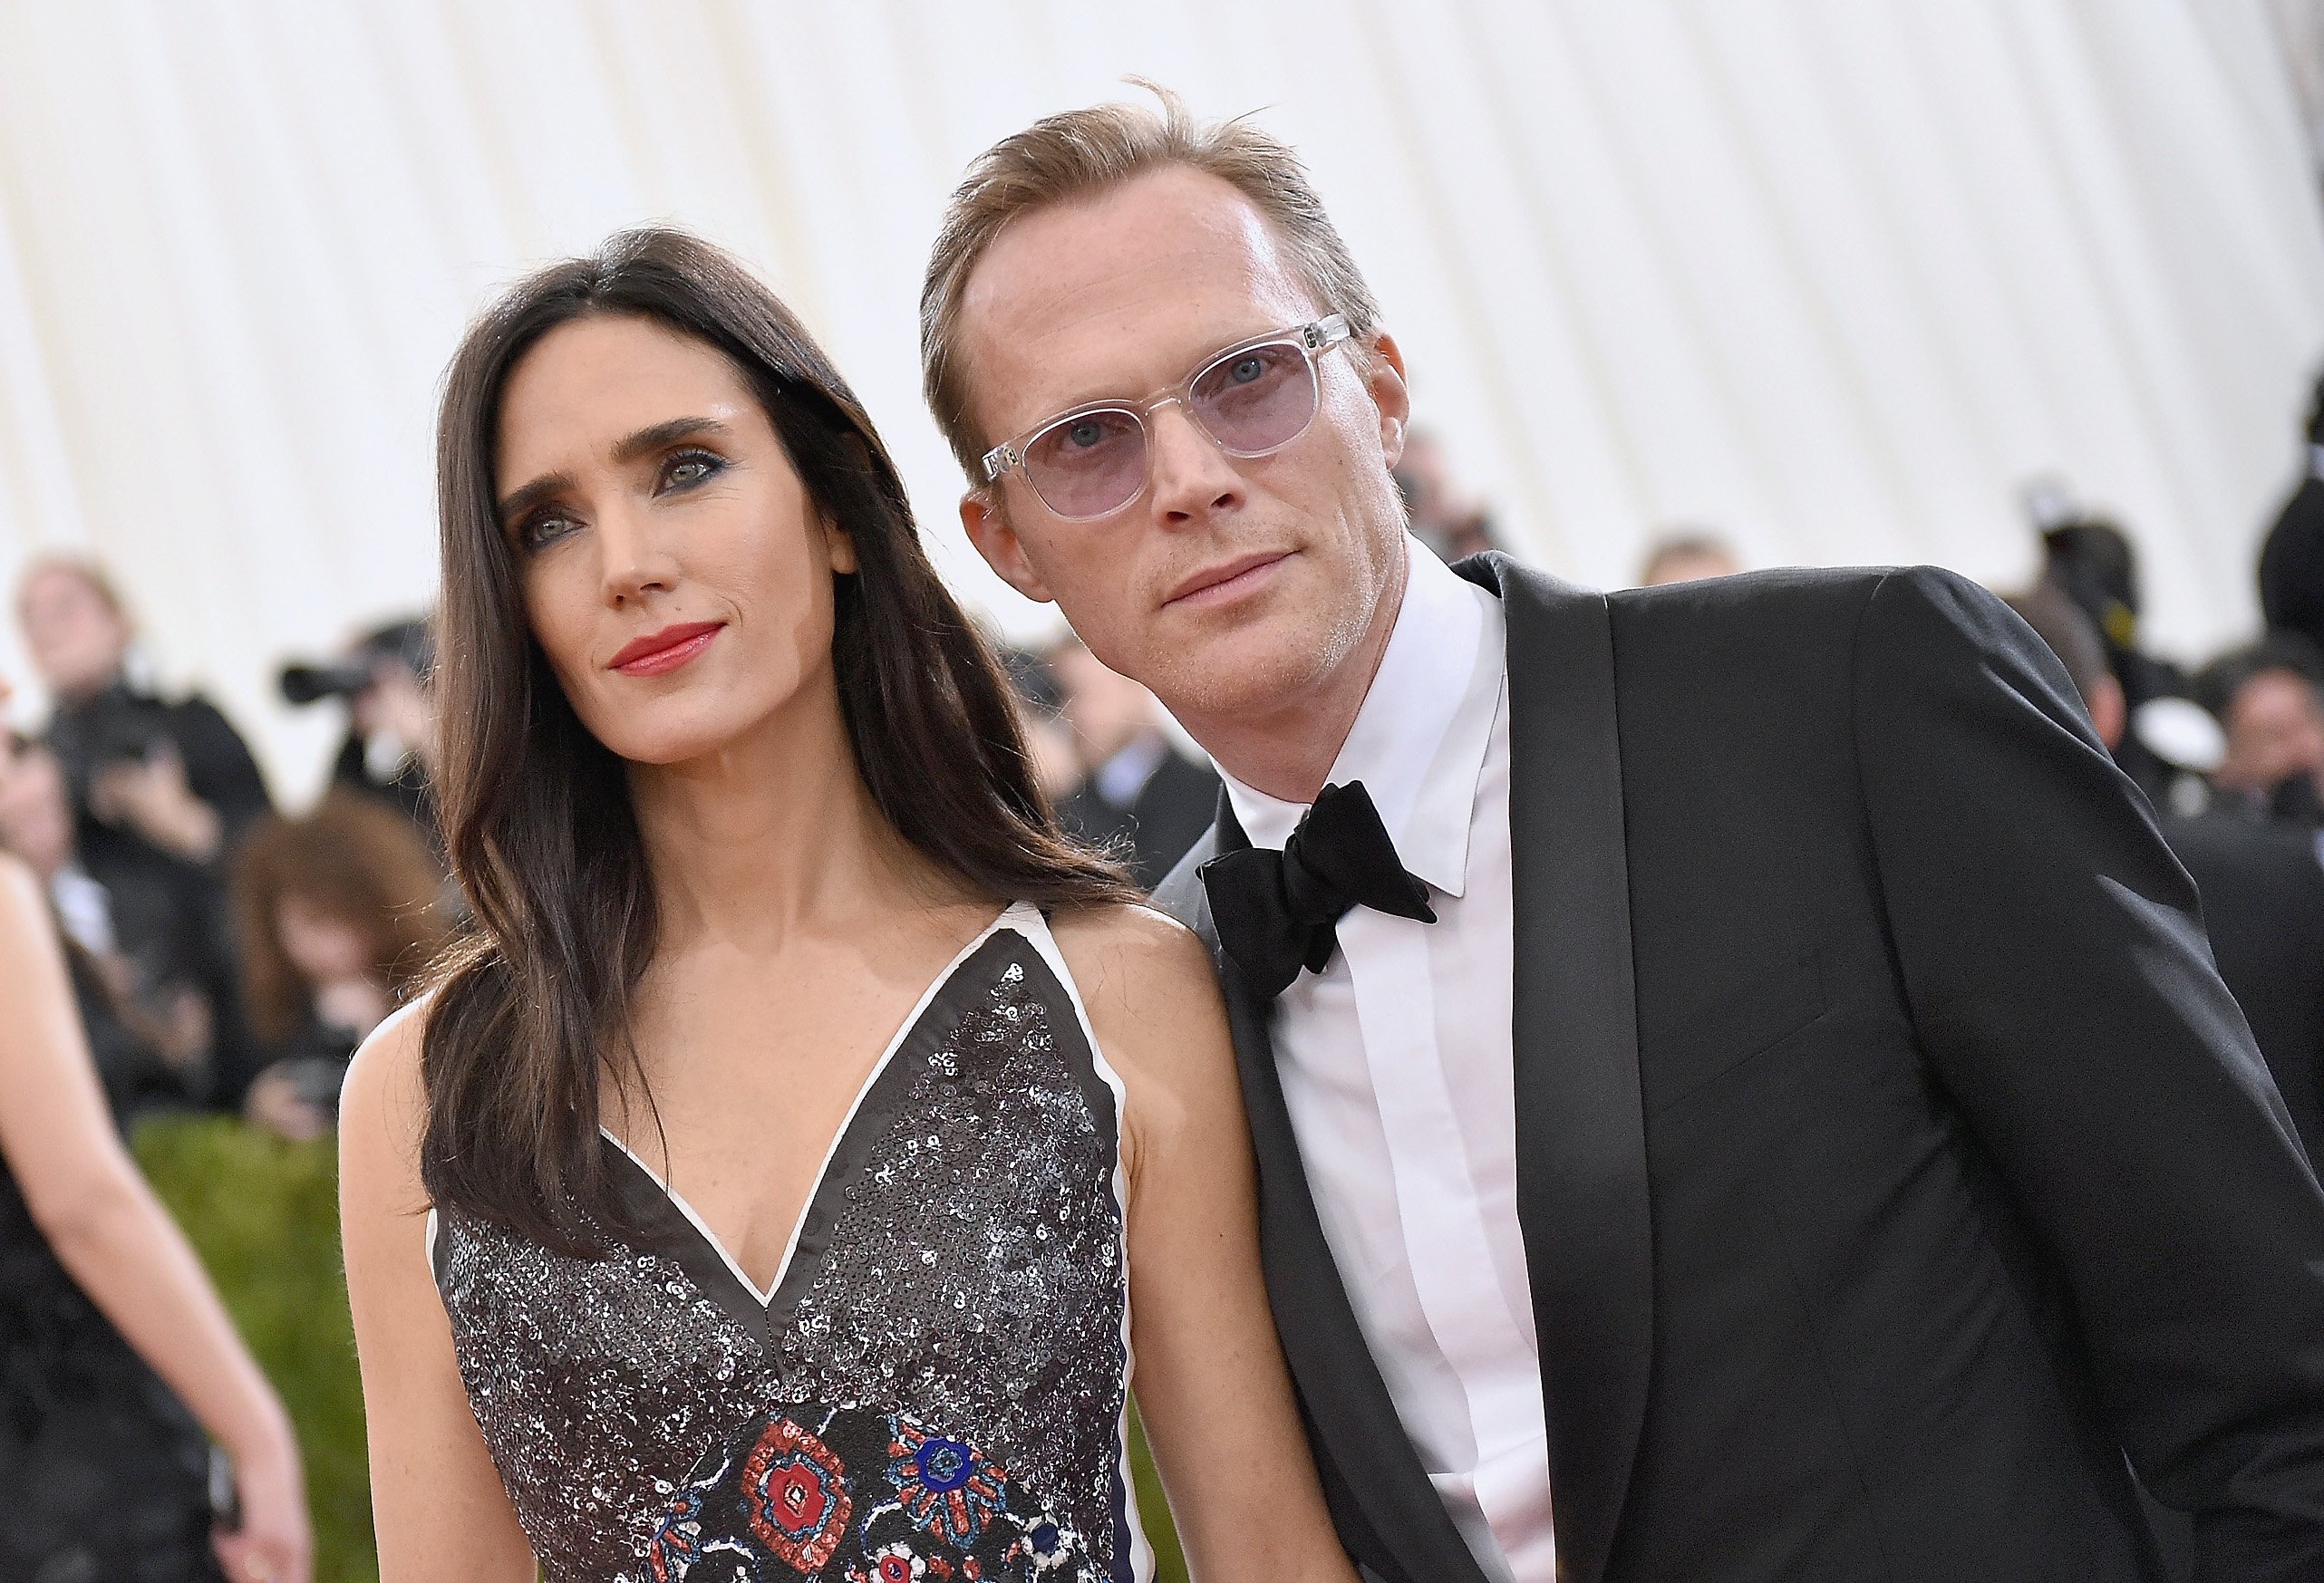 Jennifer Connelly and Paul Bettany attend the "Manus x Machina: Fashion In An Age Of Technology" Costume Institute Gala on May 2, 2016, in New York City. | Source: Getty Images